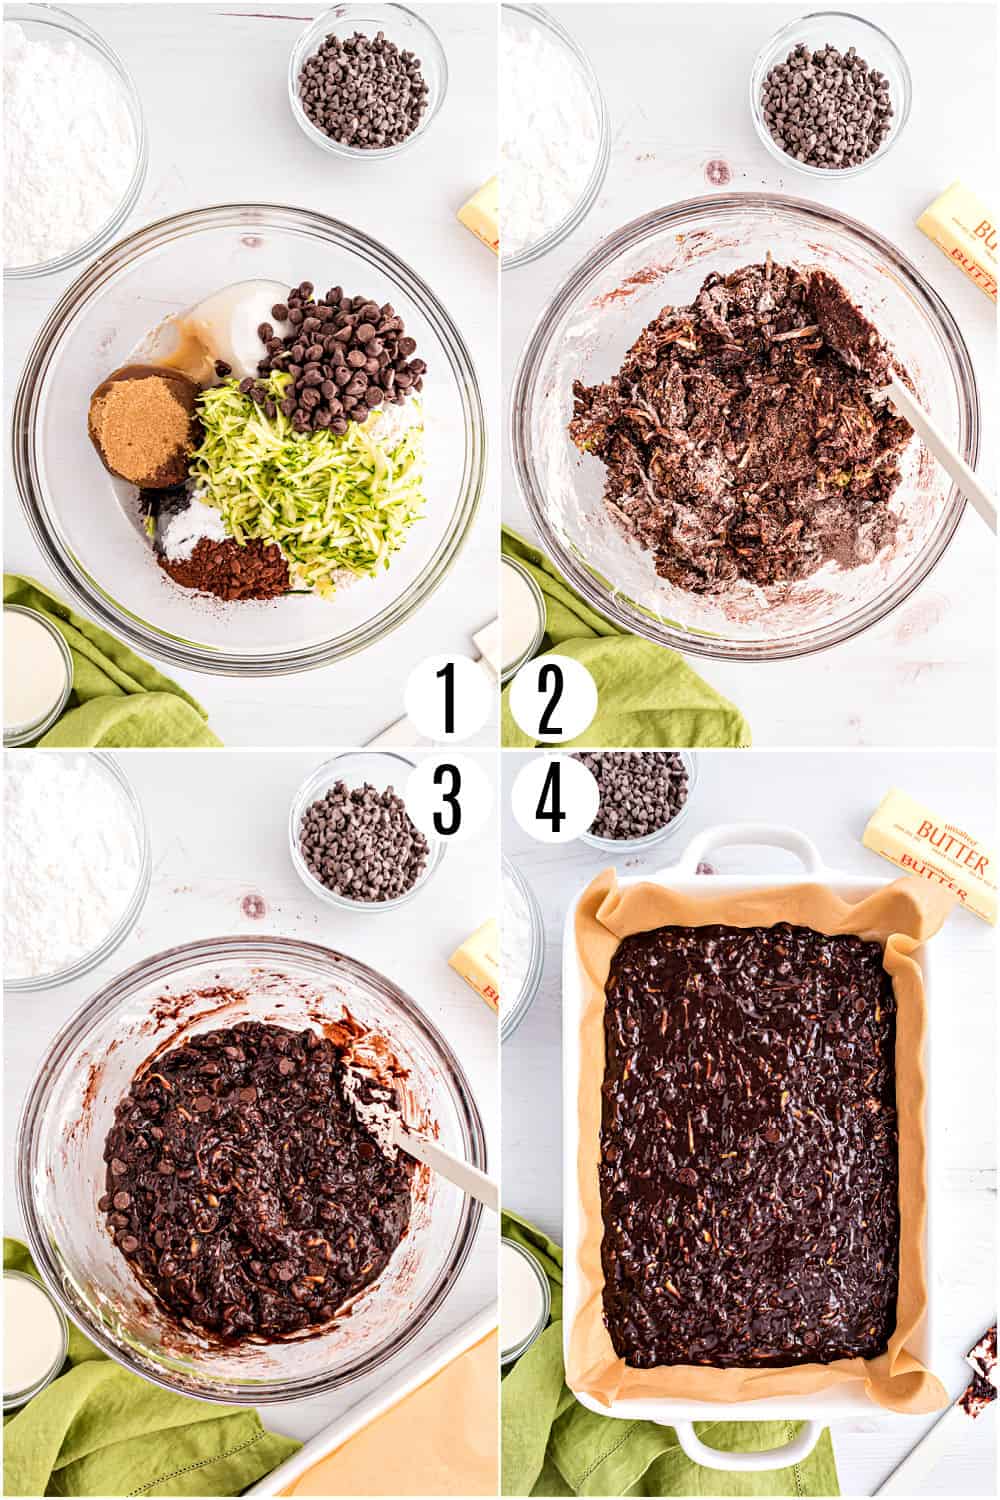 Step by step photos showing how to make zucchini brownies.